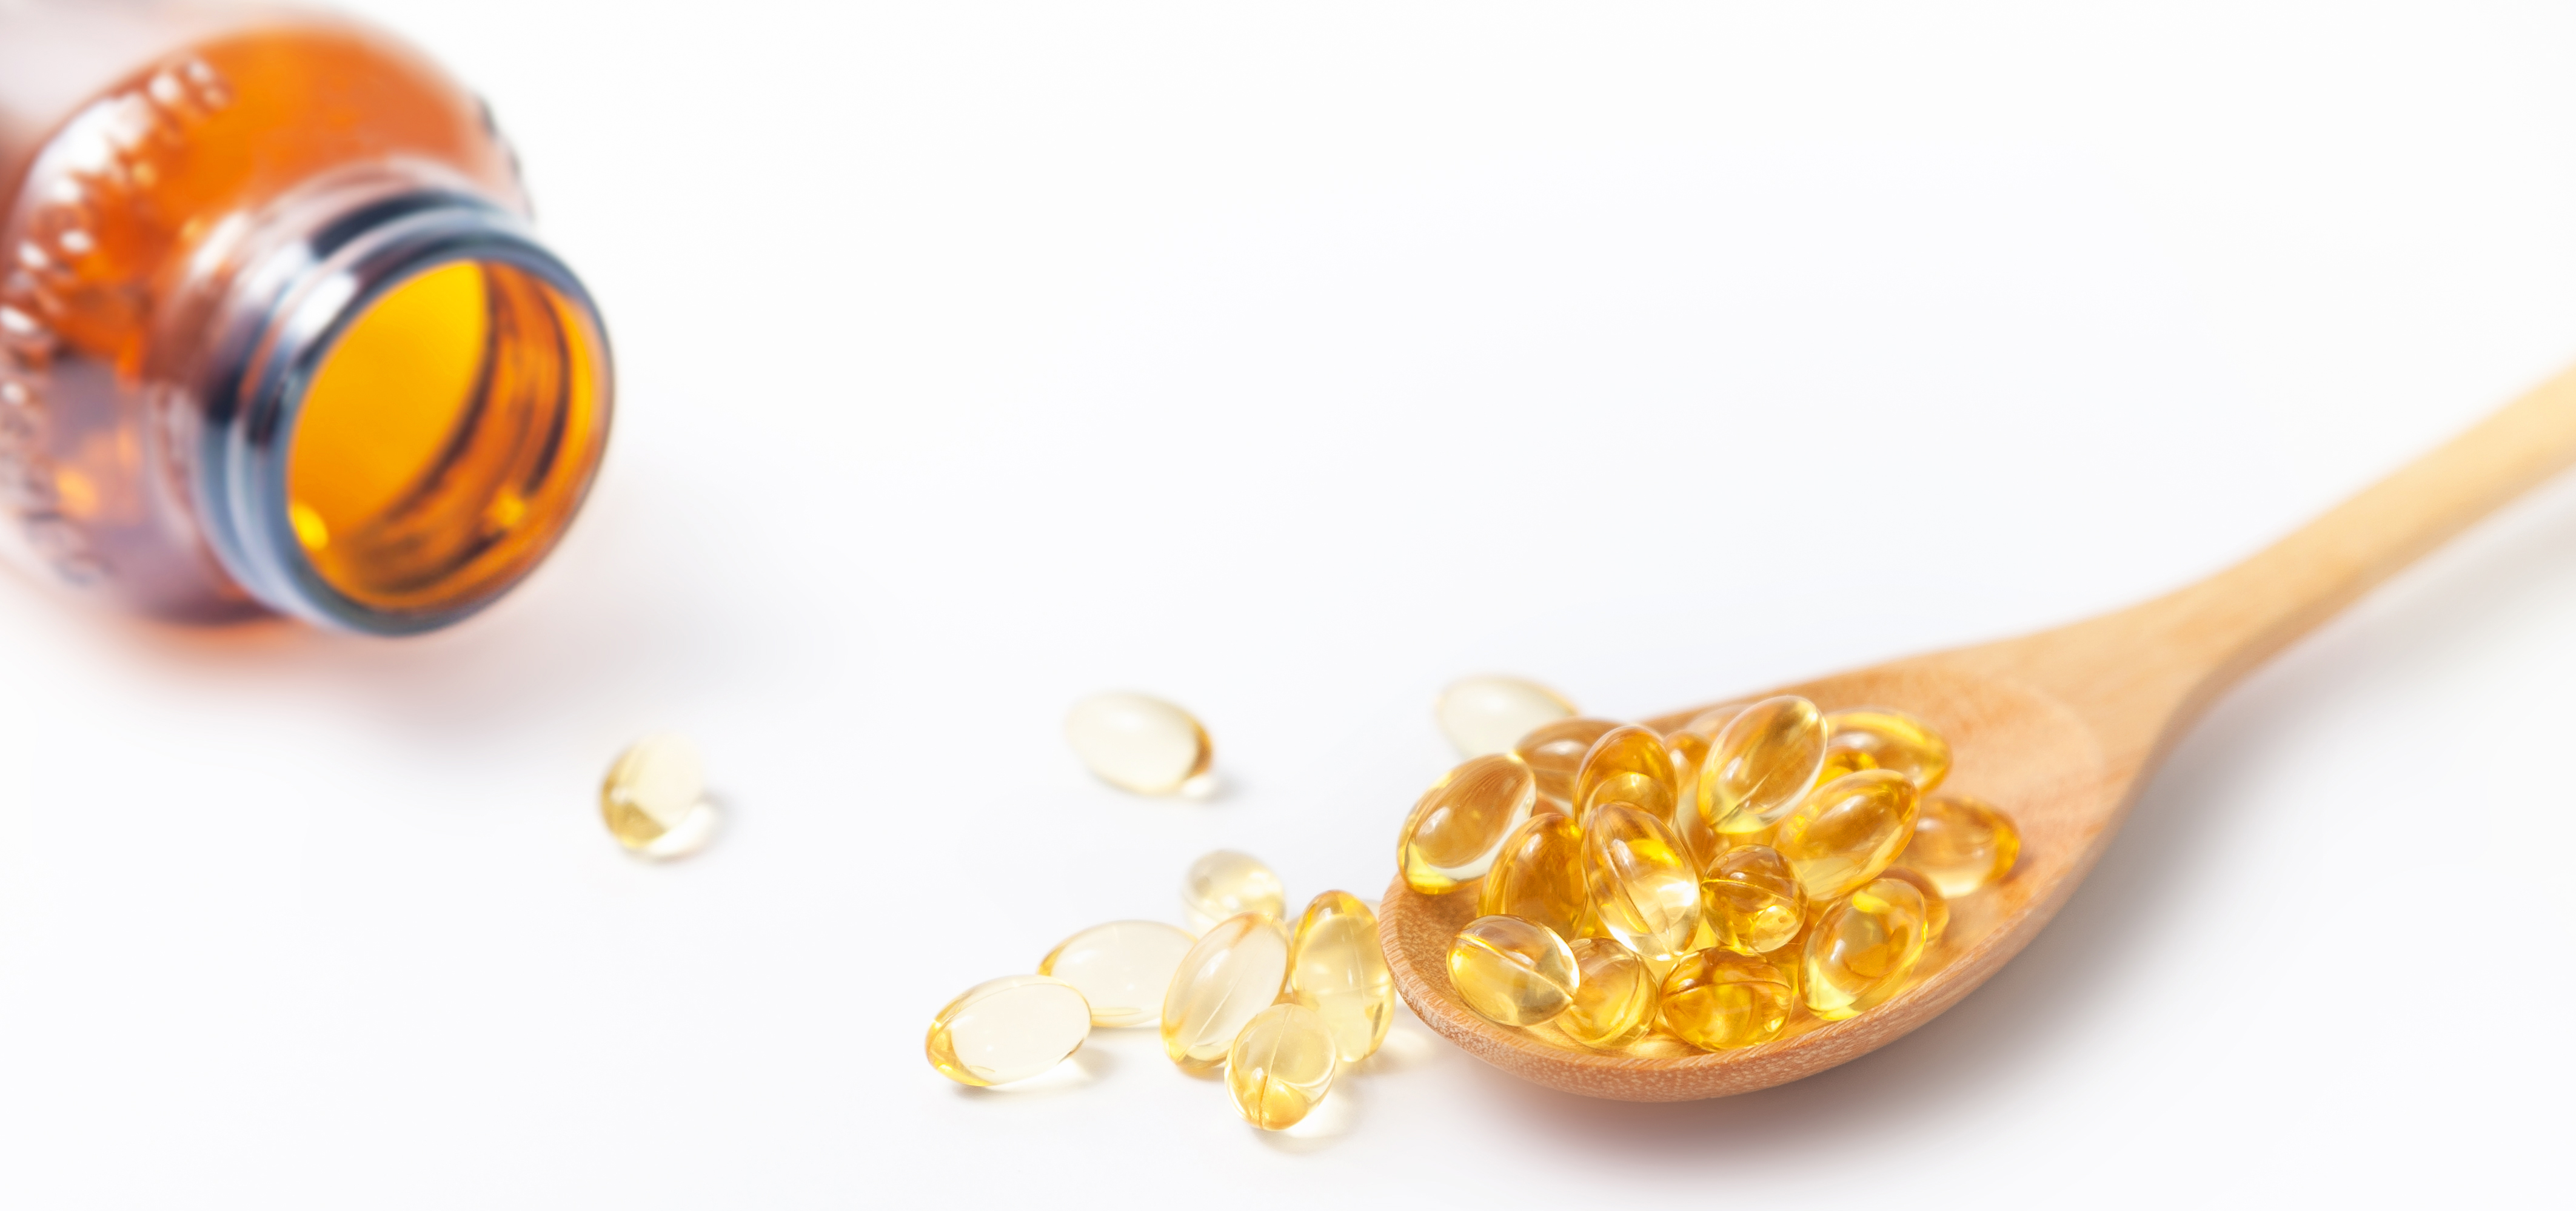 Image - New study suggests omega-3 fatty acid enriched supplement produces similar effects on brain function to exercise